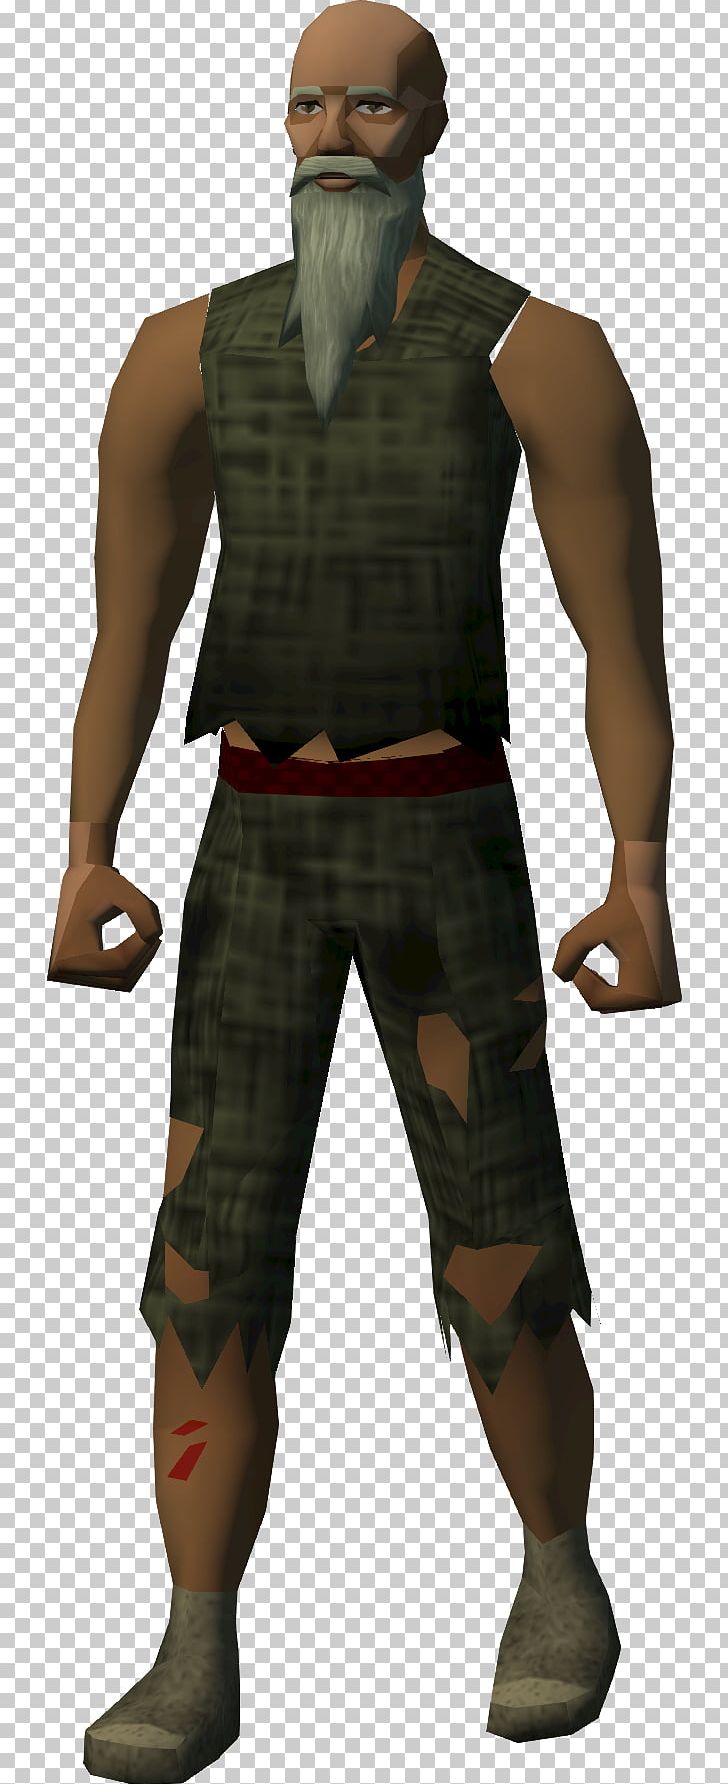 RuneScape Wikia Man PNG, Clipart, Armour, Clothing, Cold Weapon, Costume Design, Facial Hair Free PNG Download